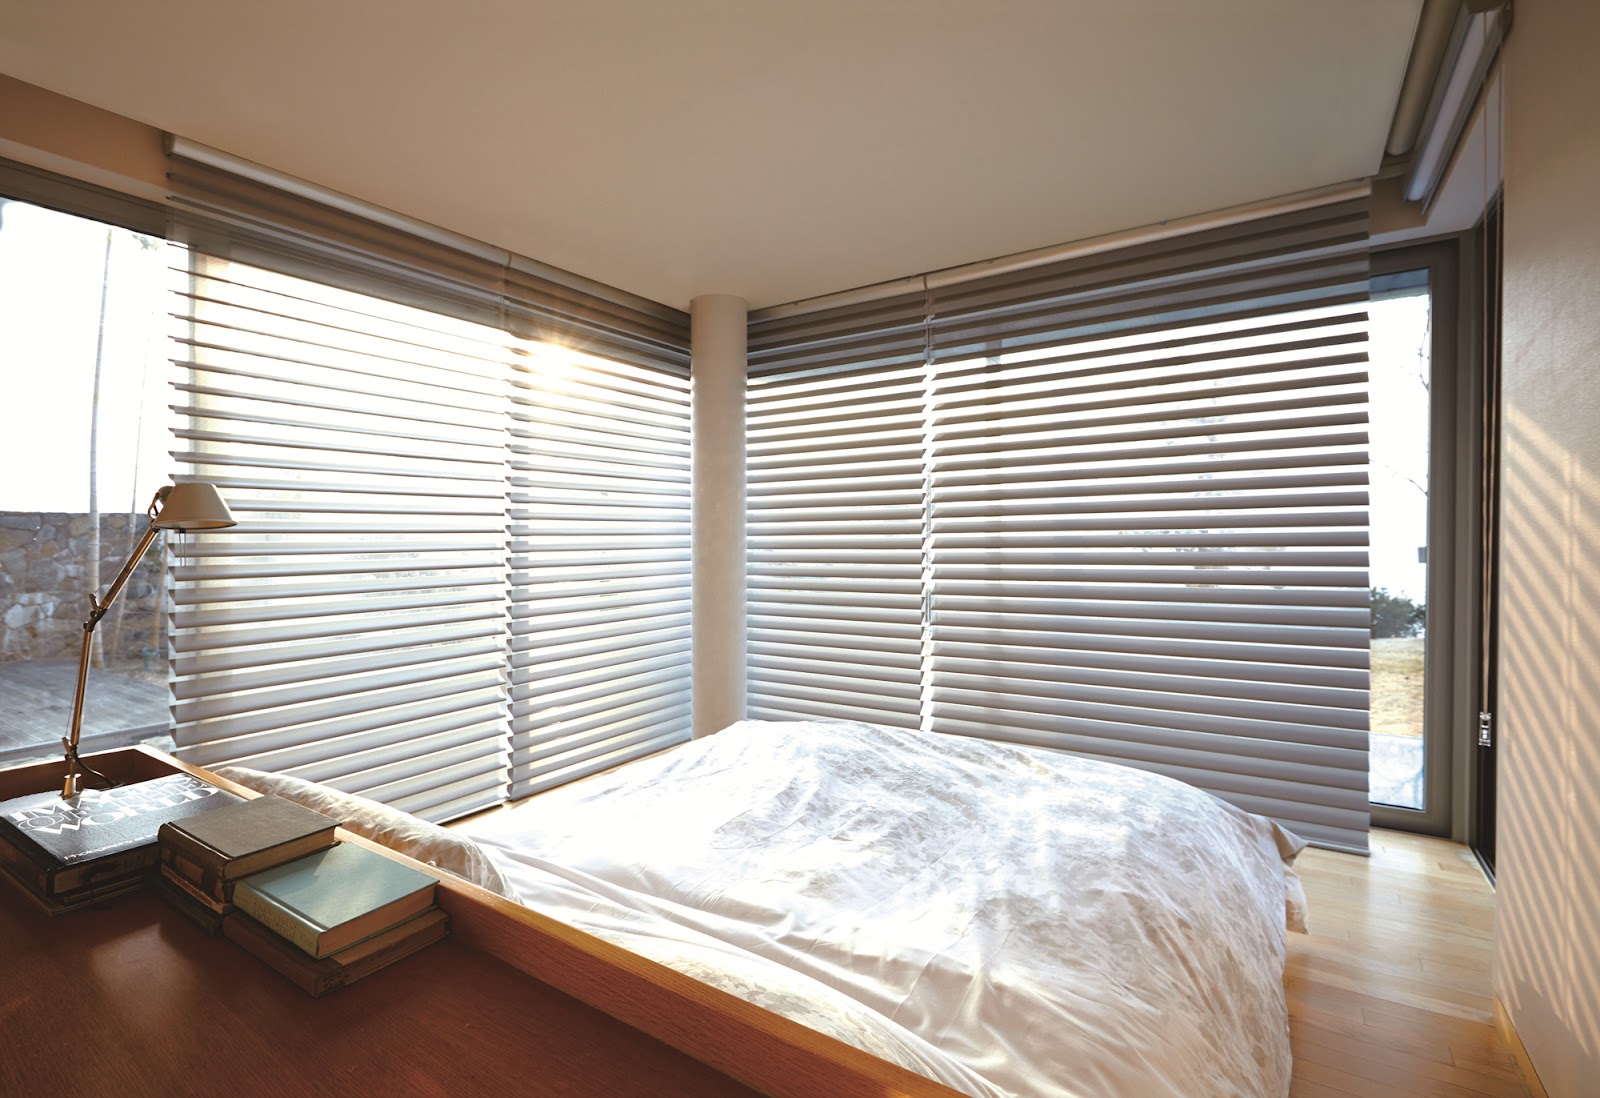 Which window blinds to choose to allow maximum natural light into your room?